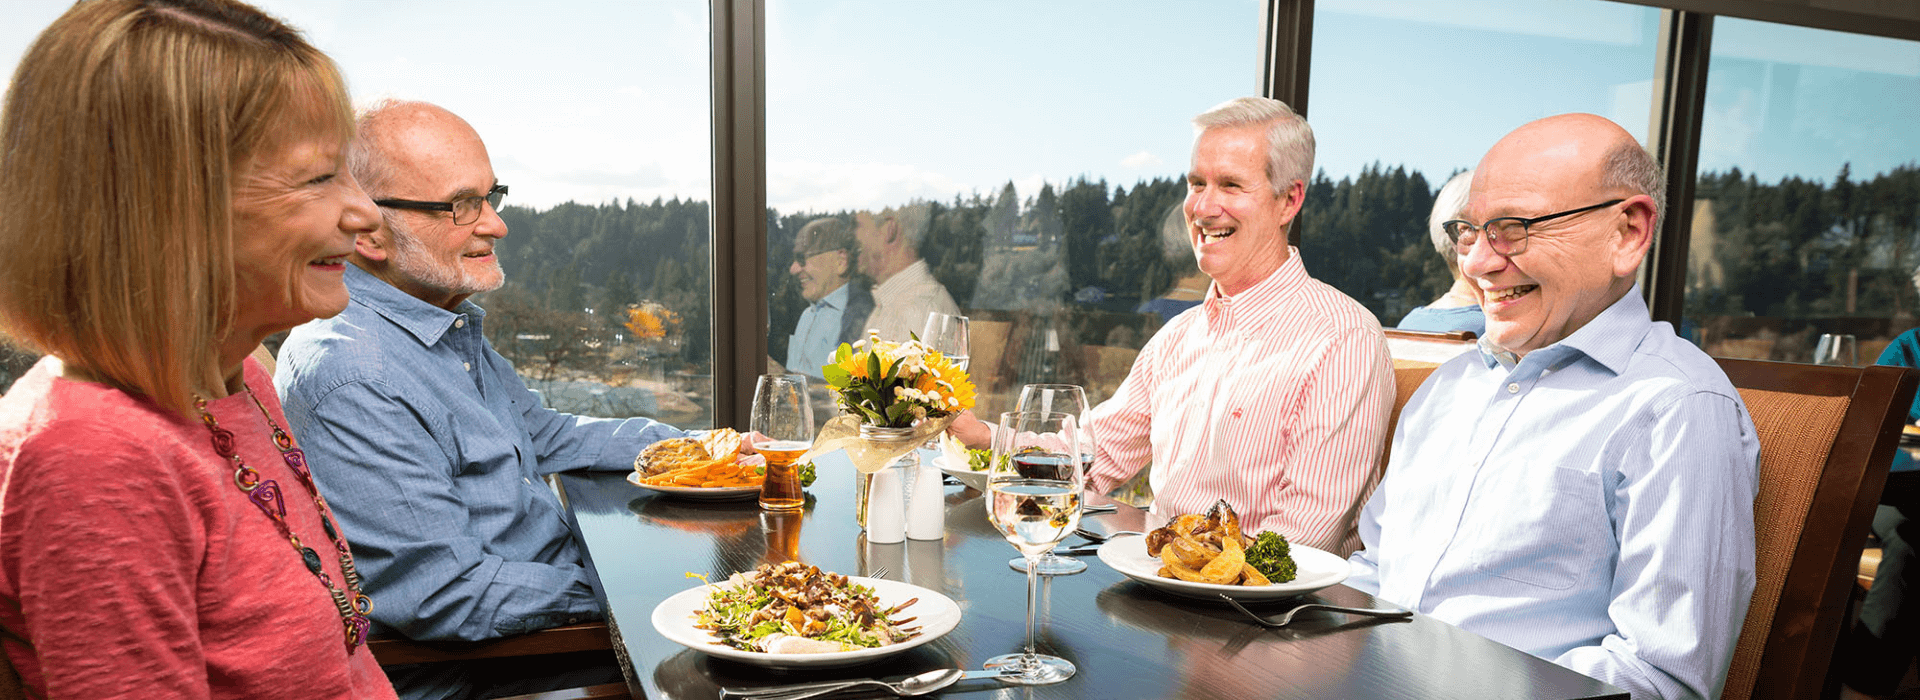 Two couples in the Riverview dining room enjoying food and the view of the river